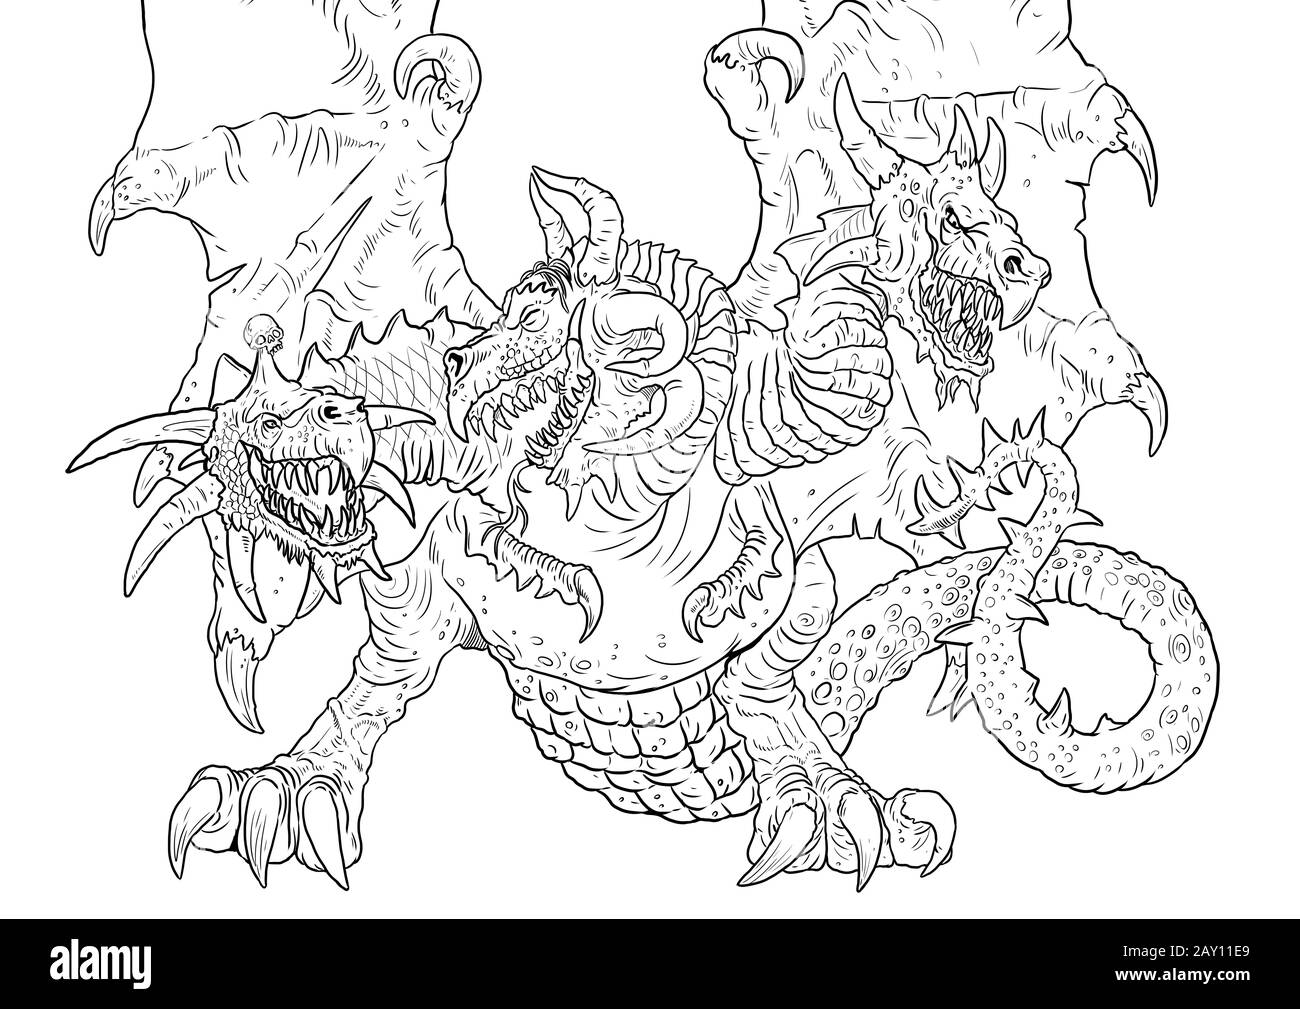 Dragon drawing cut out stock images pictures